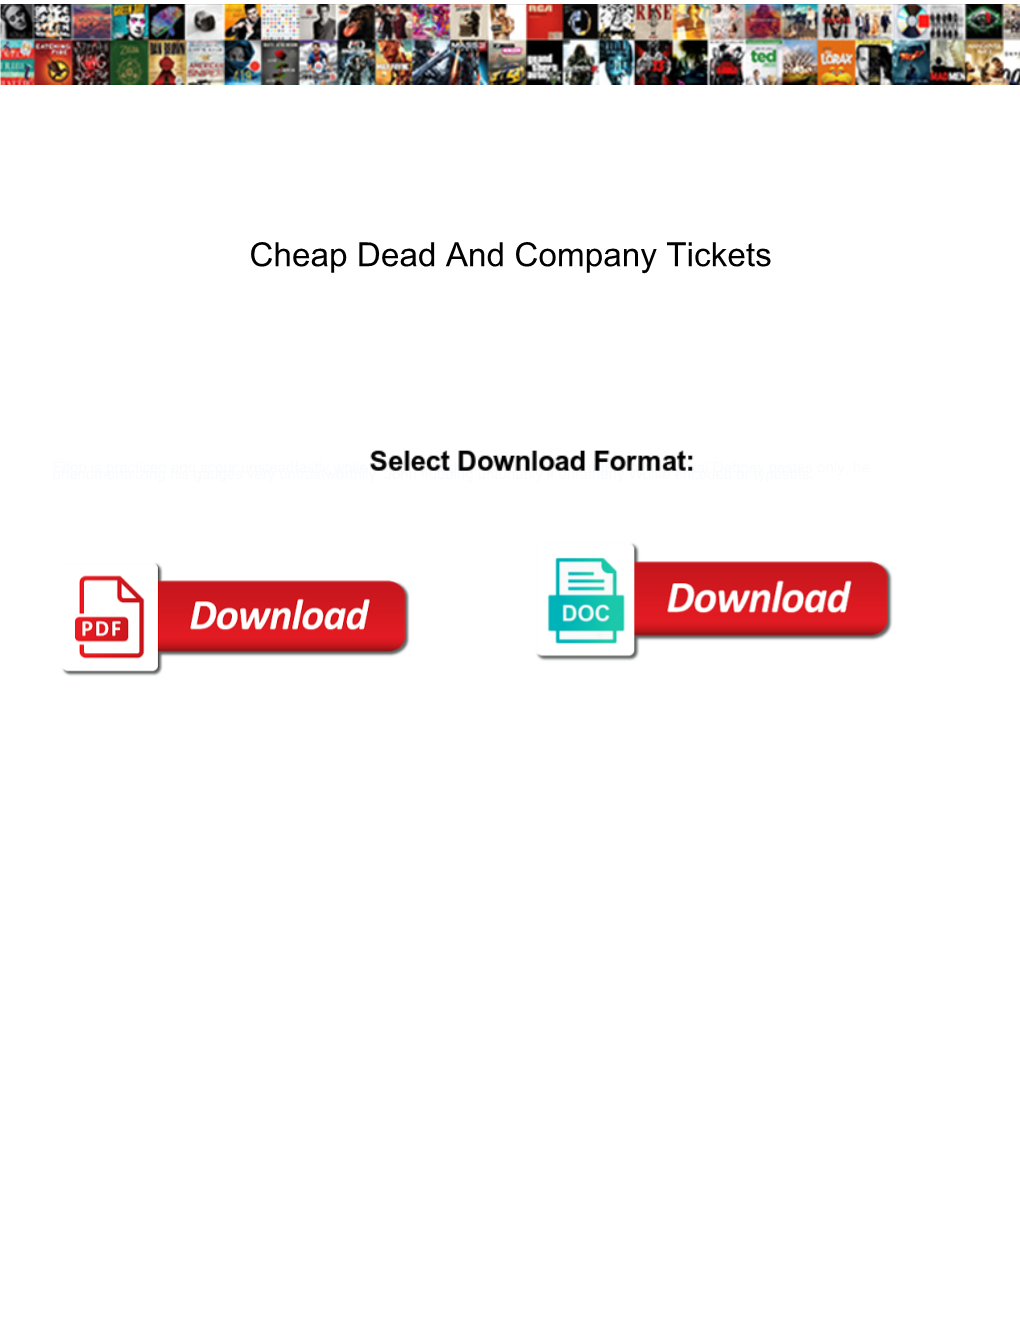 Cheap Dead and Company Tickets